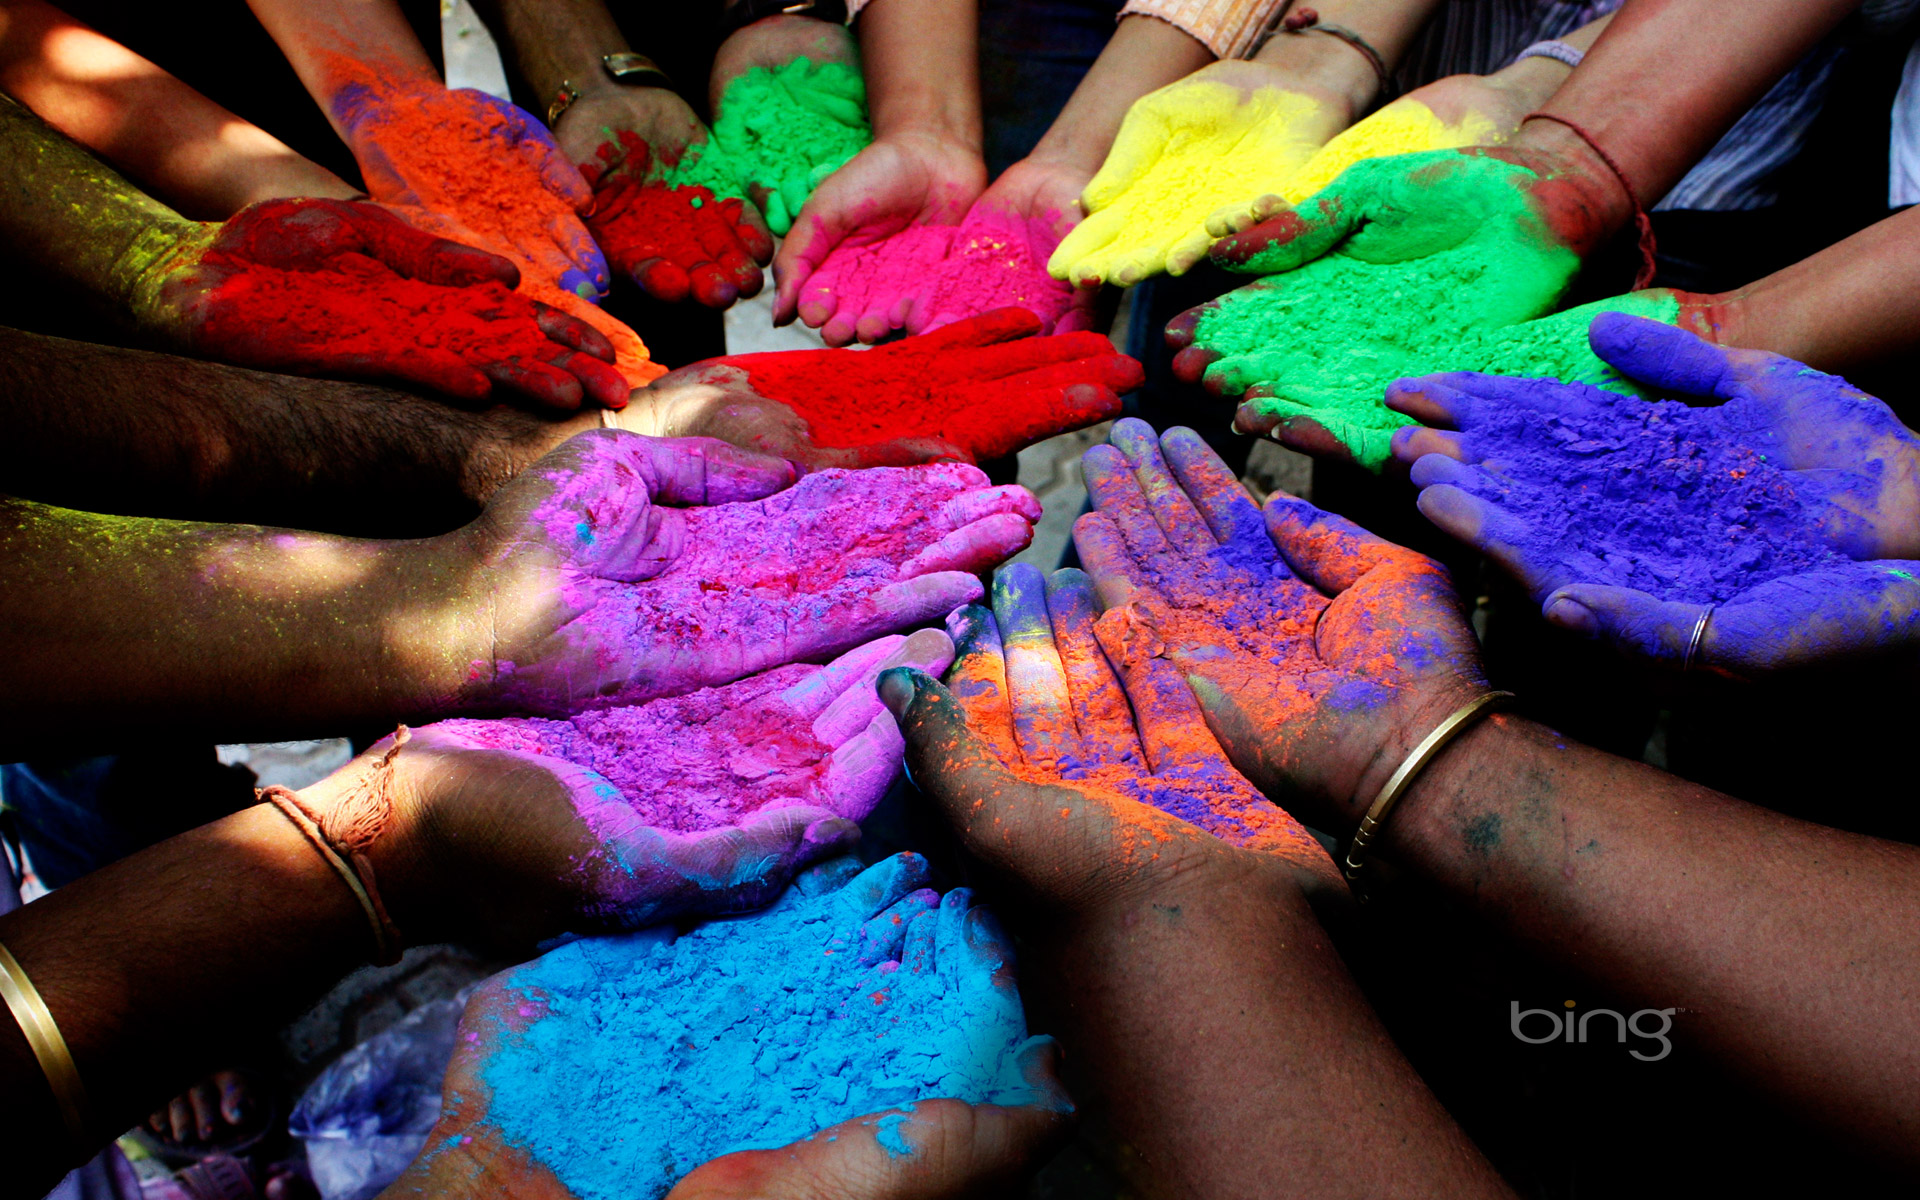 People holding powder paints to celebrate Holi (Festival of Colors) in Ahmedabad, India